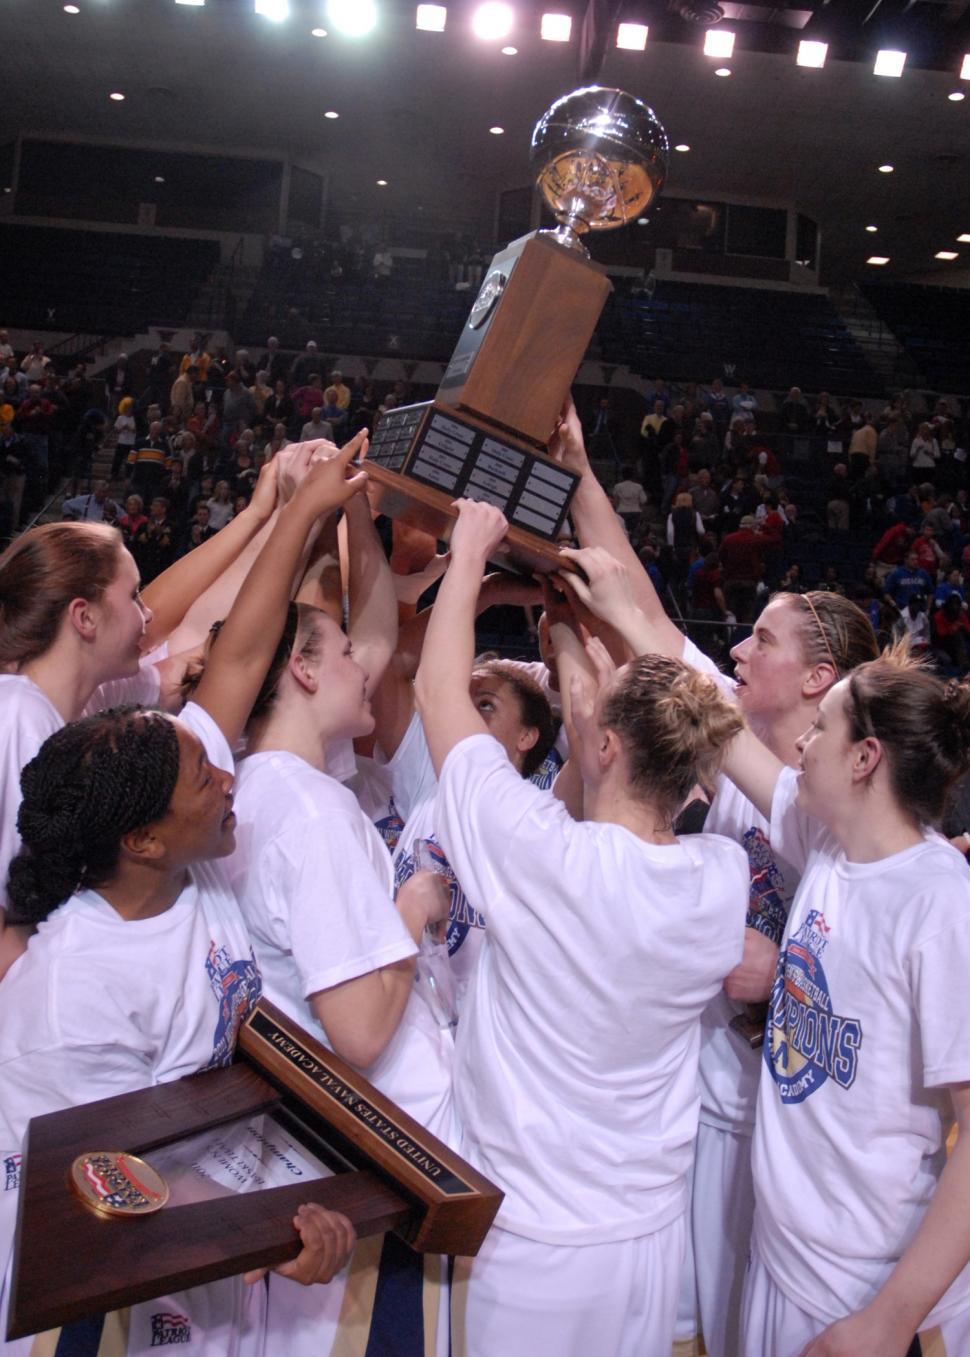 Free Image of Womens Basketball Team Holding Trophy 